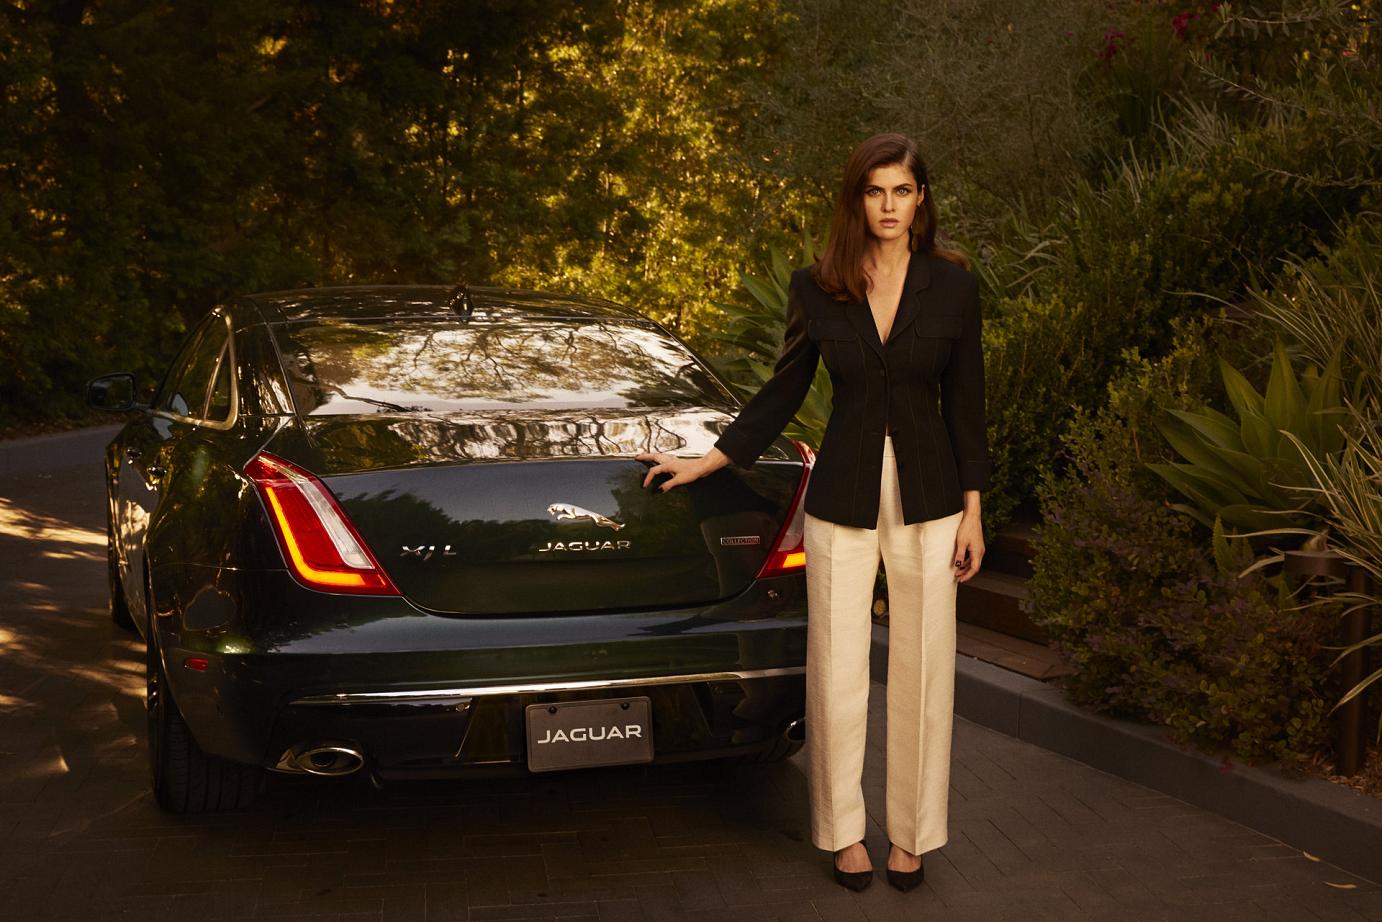 CoqCreative power by ProductionLink s.r.l. Alexandra Daddario for Jaguar Alexandra-Daddario-for-Jaguar  Alexandra Daddario for Jaguar